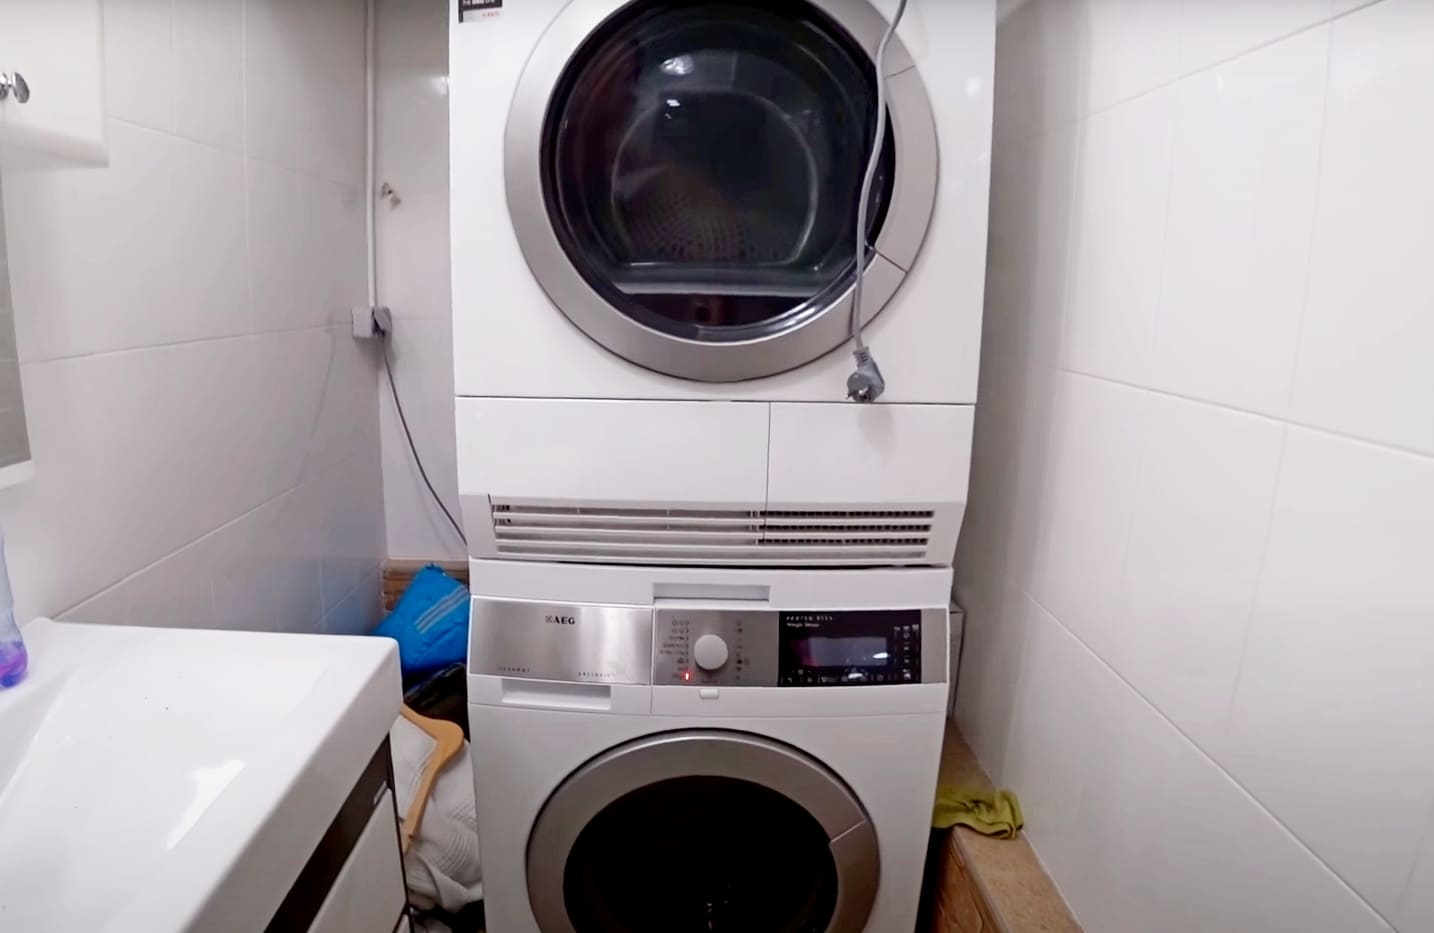 Where to place the washer and dryer set